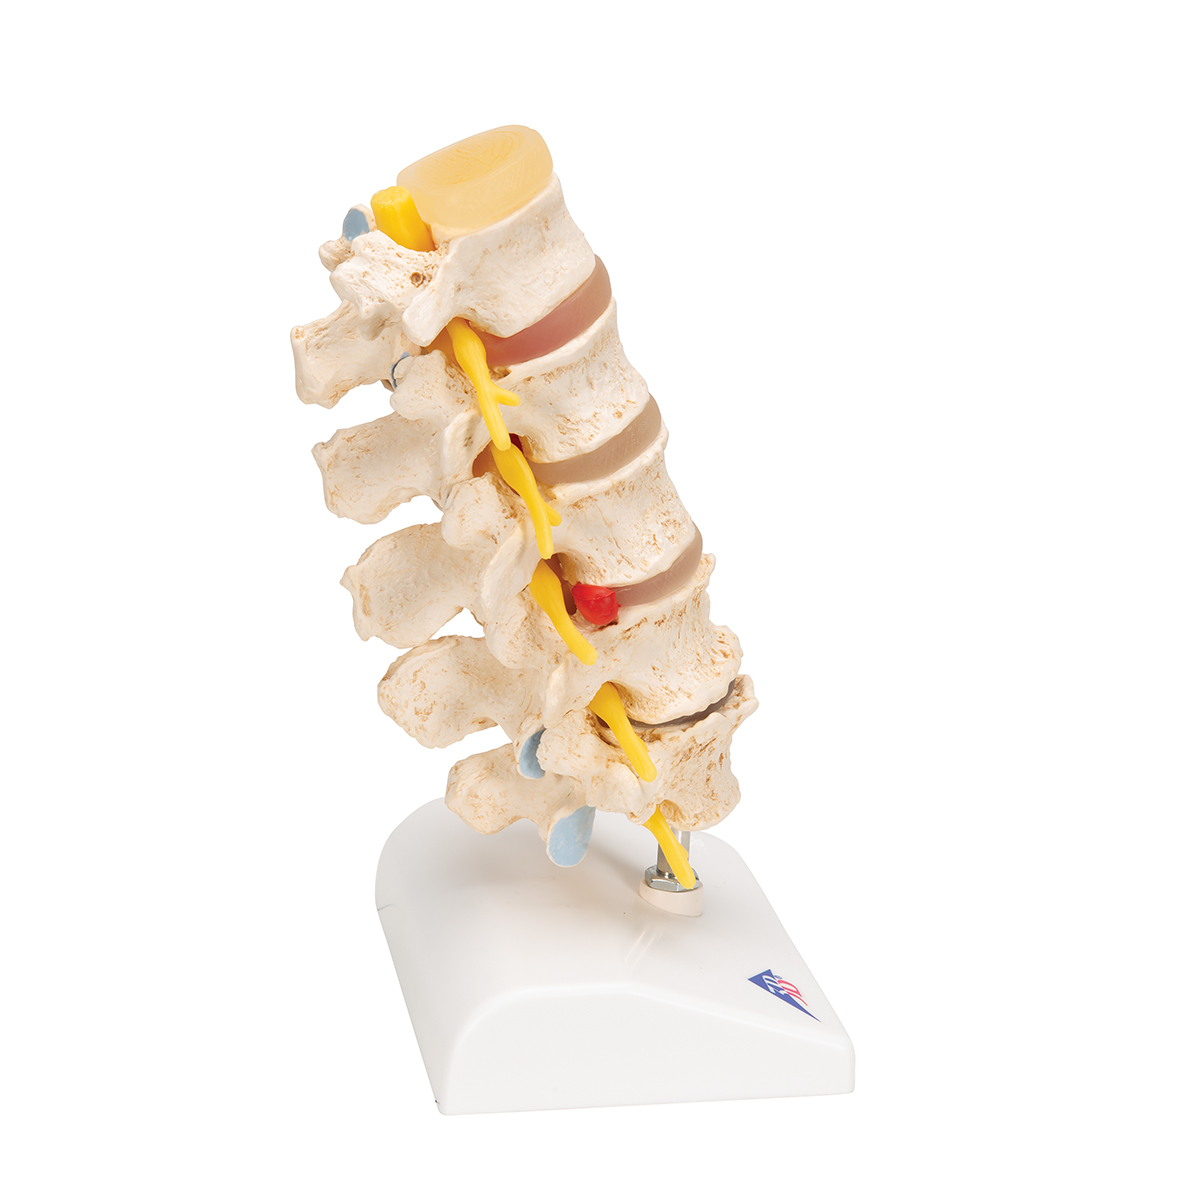 13.4 Height 3B Scientific A76/5 Lumbar Spinal Column with Dorso-Lateral Prolapsed Intervertebral Disc